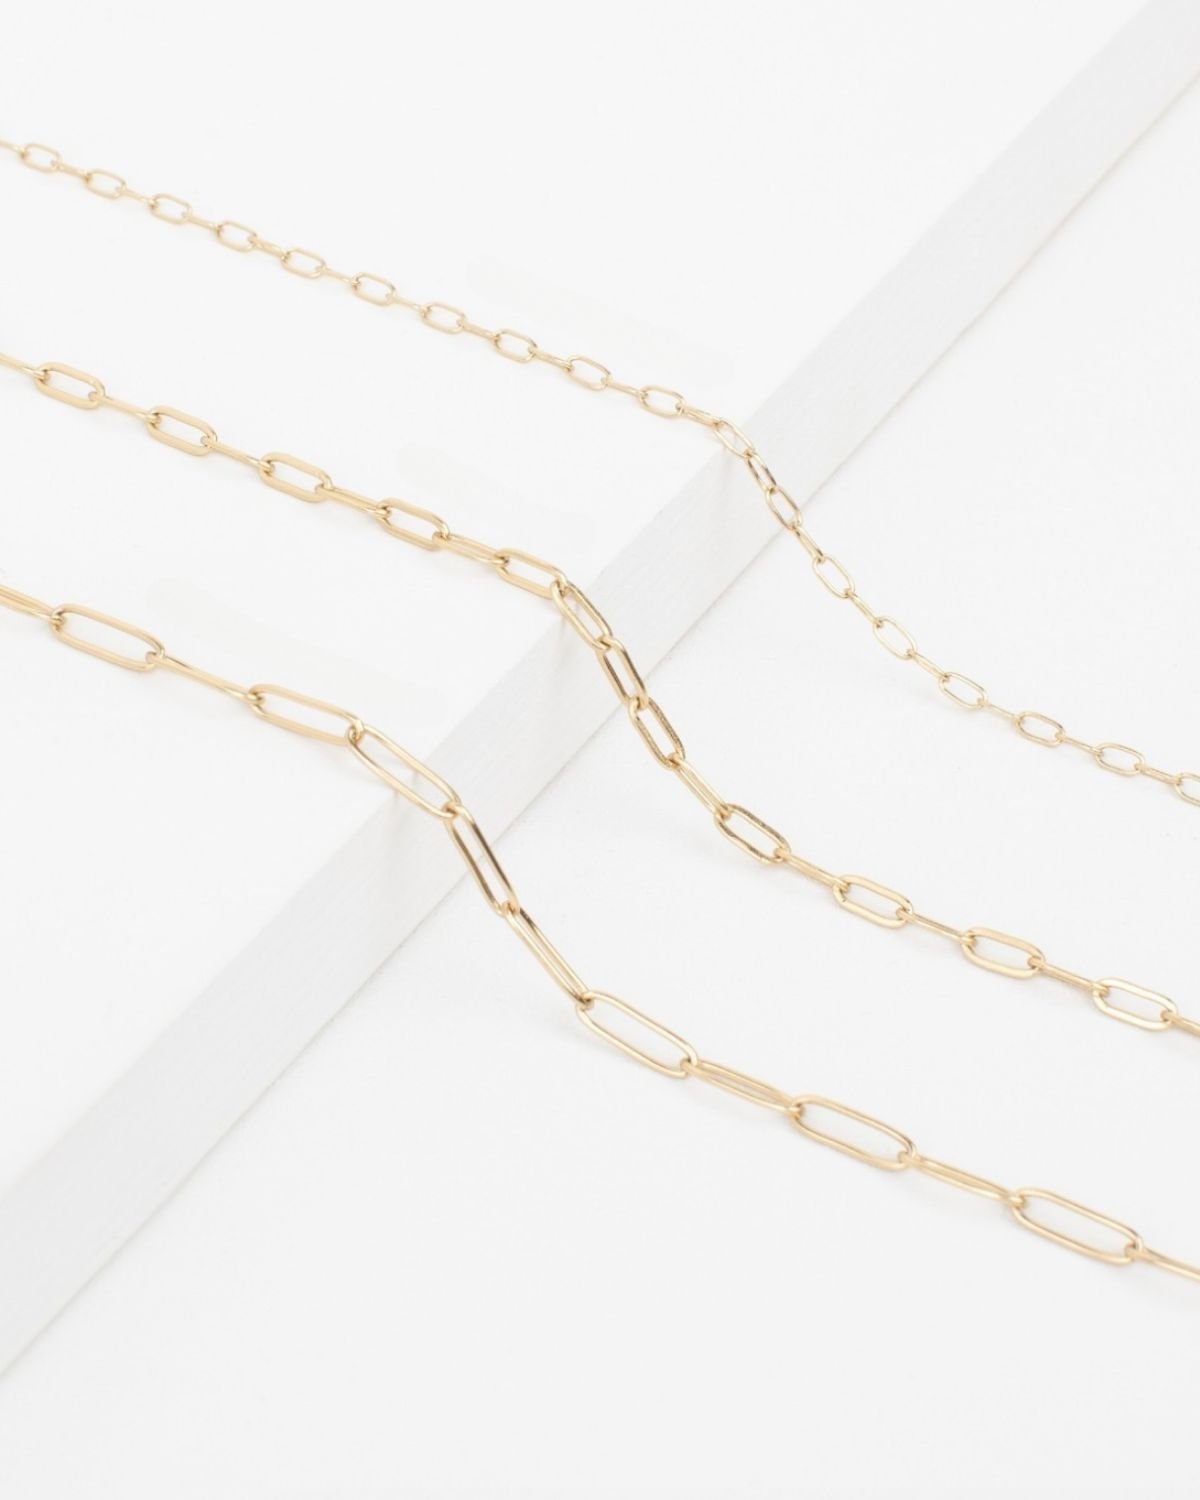 Exciting news! Join us at our NE location on Friday, May 3 from 12-2 for an exclusive Permanent Jewelry Pop-Up event with our friends at @permalinxbyjbloom ✨

Discover stunning pieces that effortlessly elevate your style and will withstand the test o